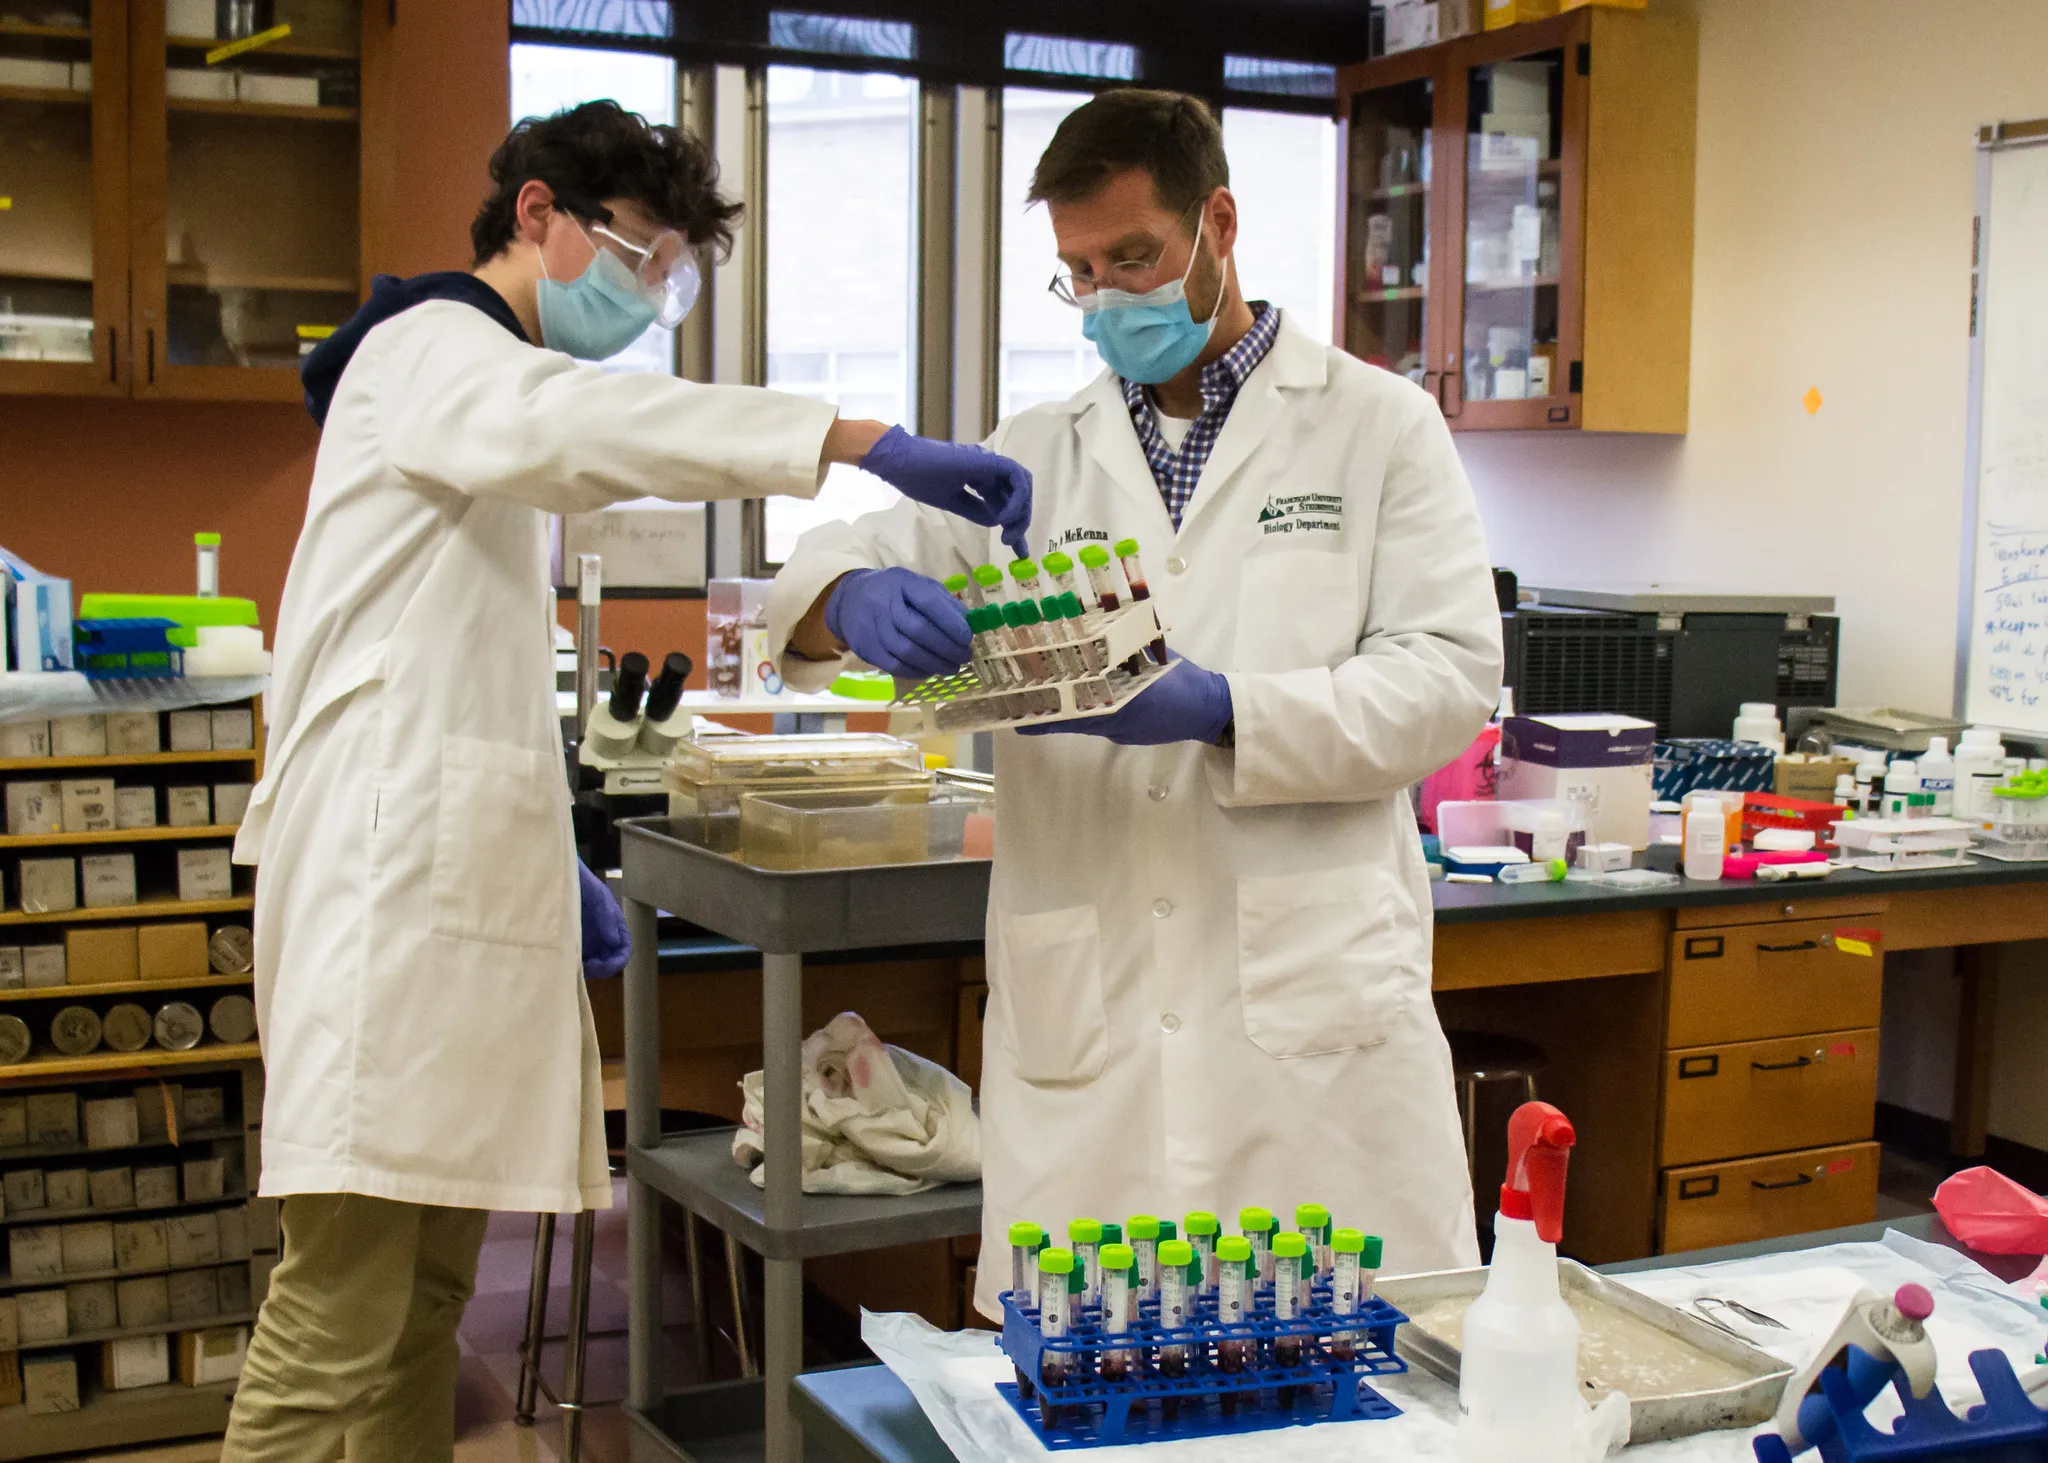 Biology major Michael Rohall and Franciscan University biology professor Dr. Kyle McKenna prepare to analyze blood samples for coronavirus specific antibodies. Photo courtesy of the Franciscan University of Steubenville.?w=200&h=150